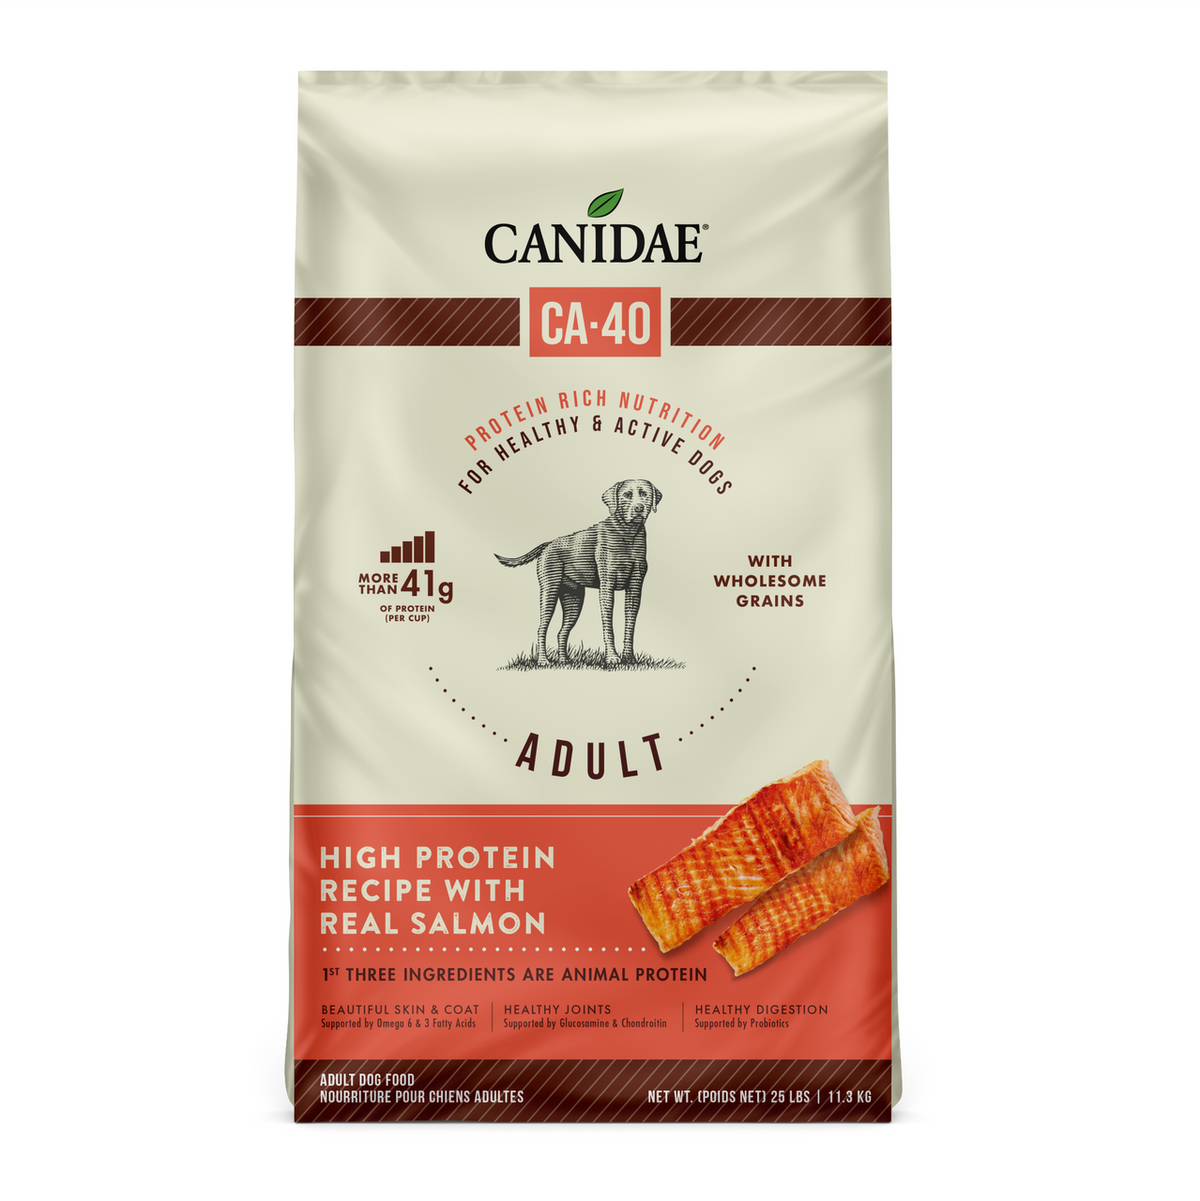 Canidae - All Breeds, Adult Dog CA-40 High Protein Real Salmon Recipe Dry Dog Food